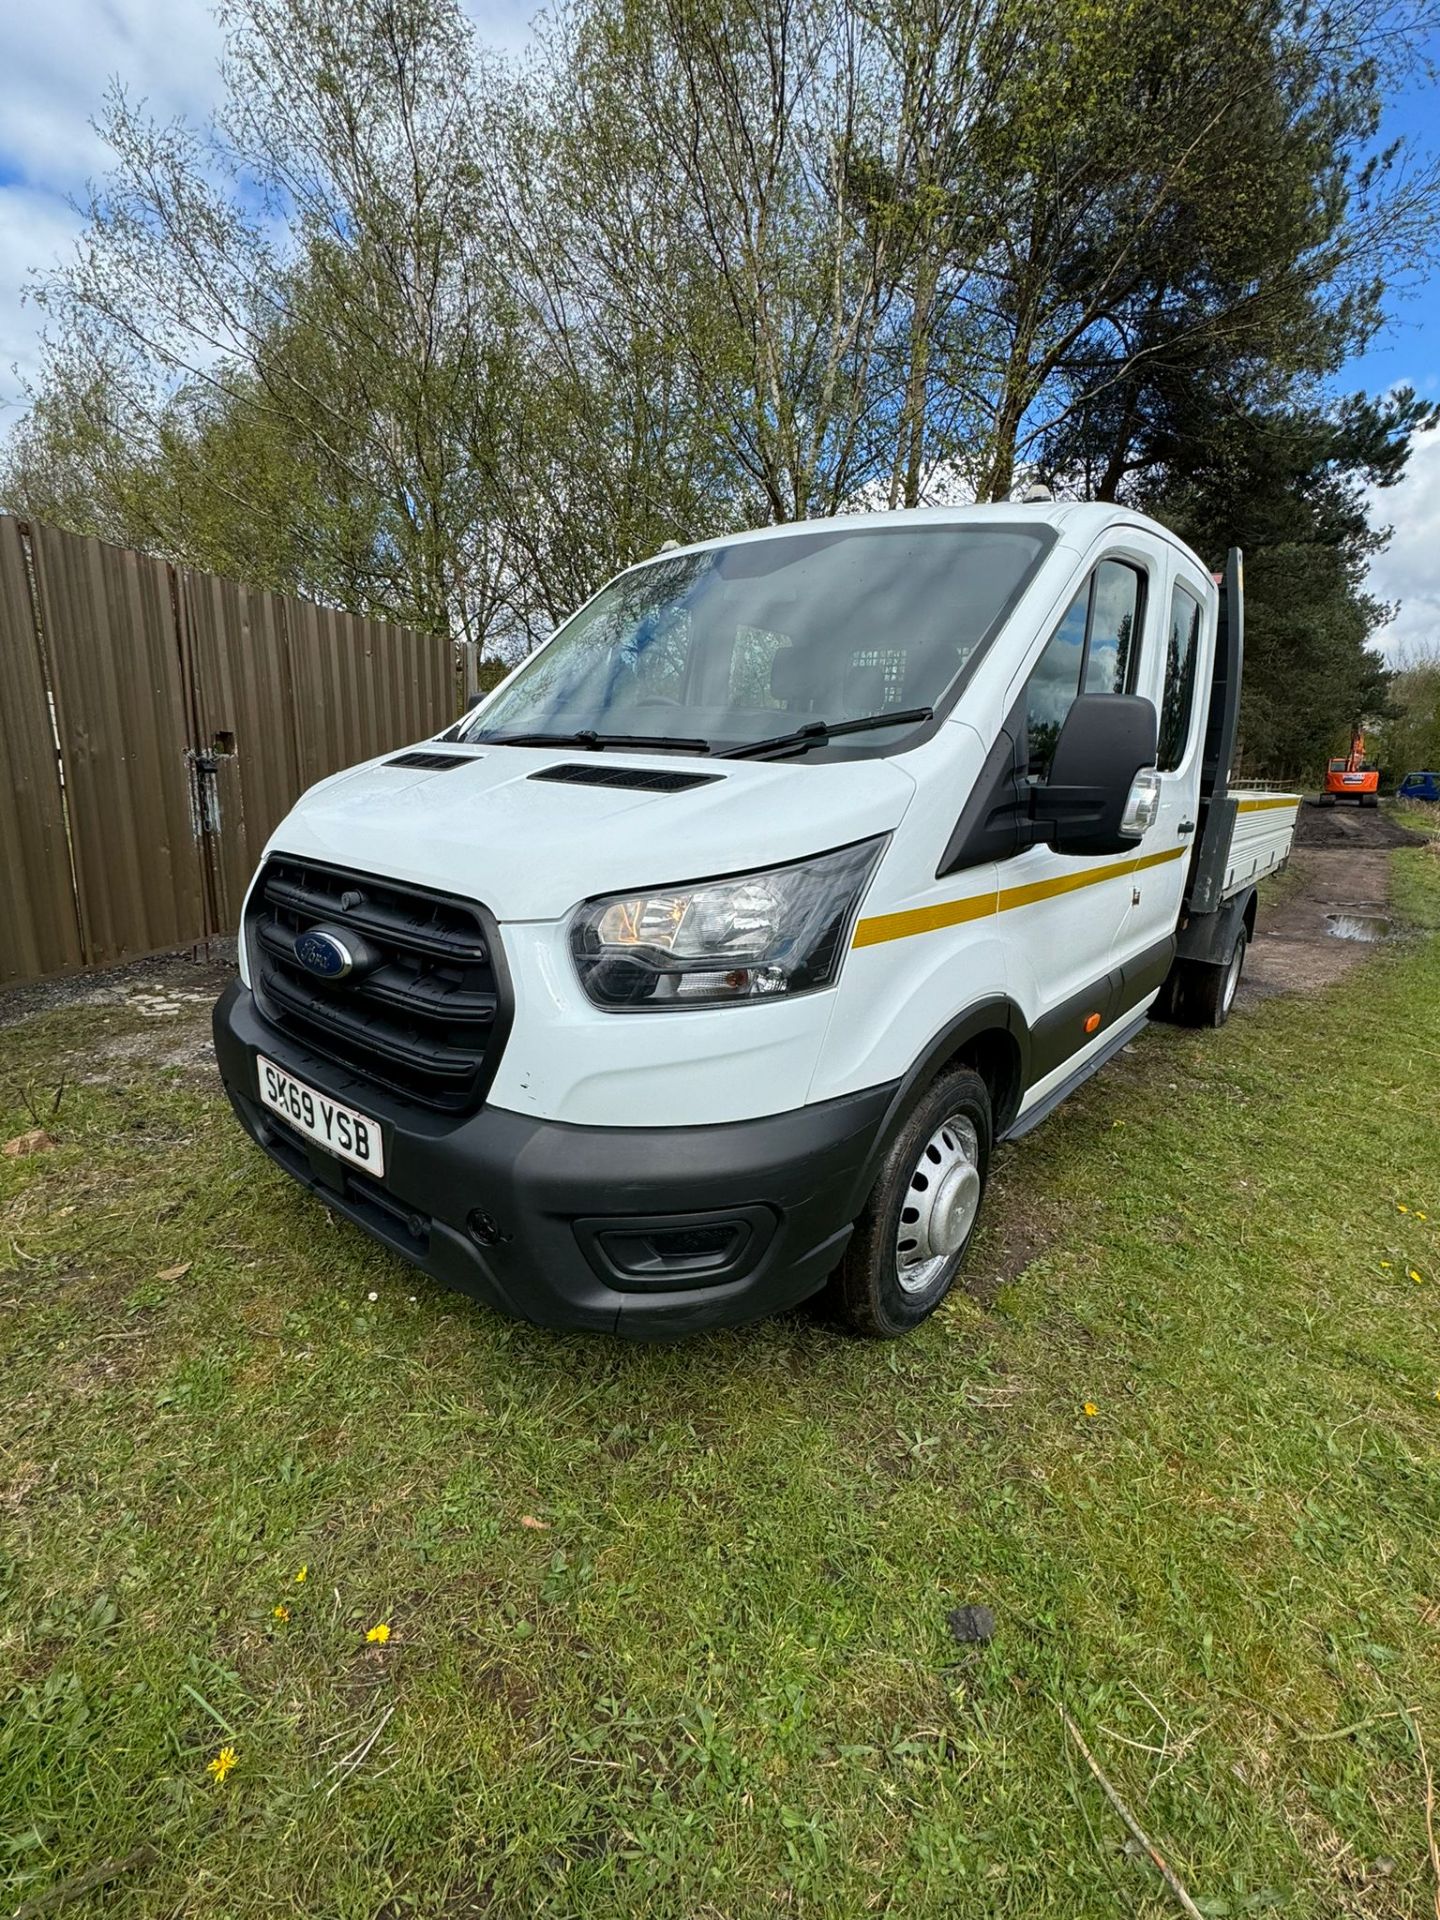 >>>SPECIAL CLEARANCE<<< 96K MILES ONLY** FORD TRANSIT TIPPER 2020 DOUBLE CAB TRUCK - Image 3 of 15